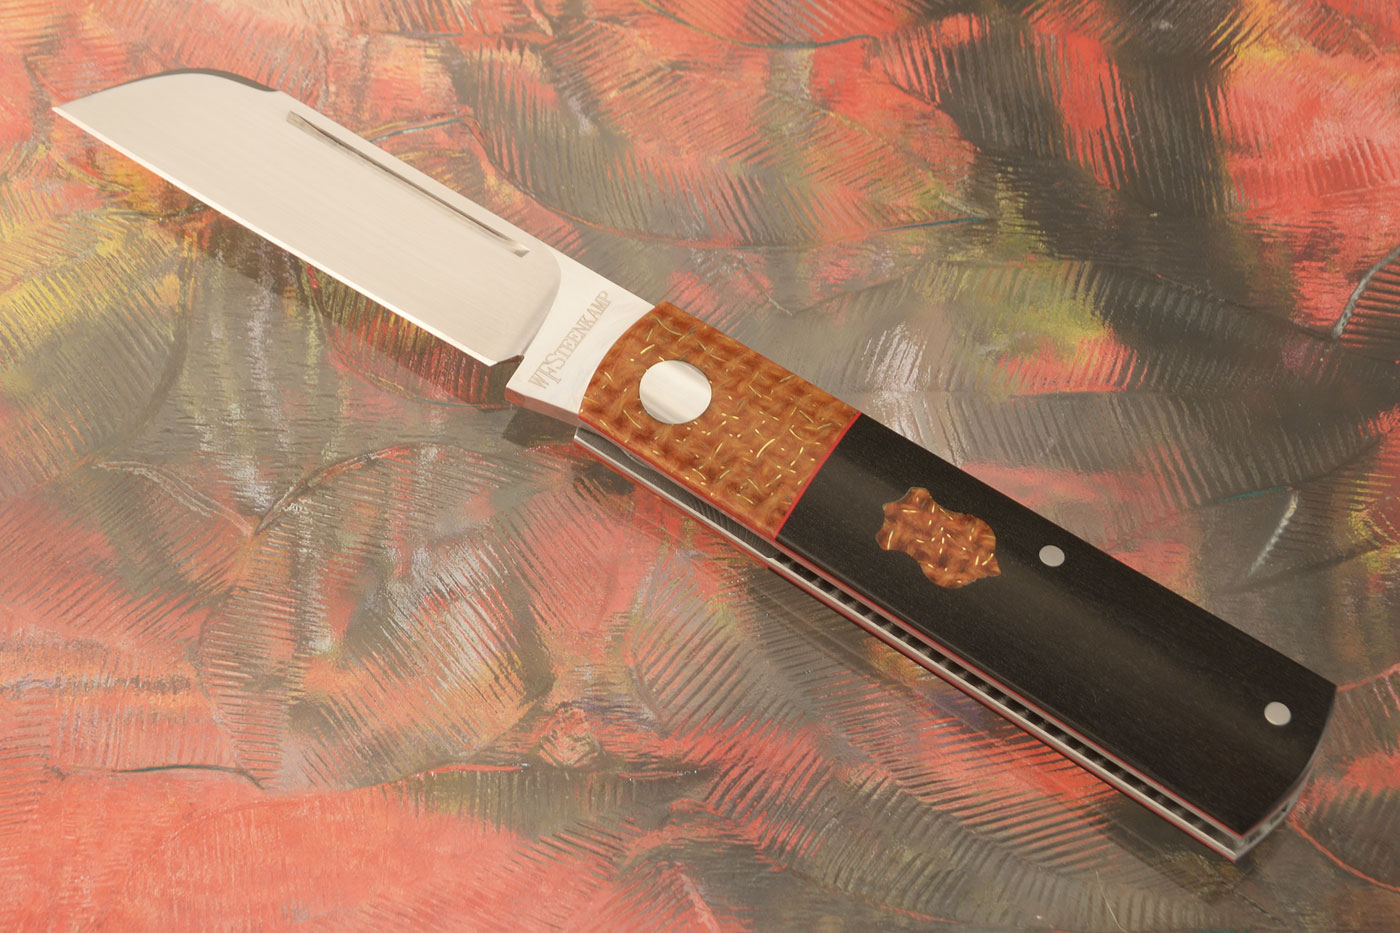 Barlow Slipjoint with Richlite and Thunderstorm Kevlar - RWL-34